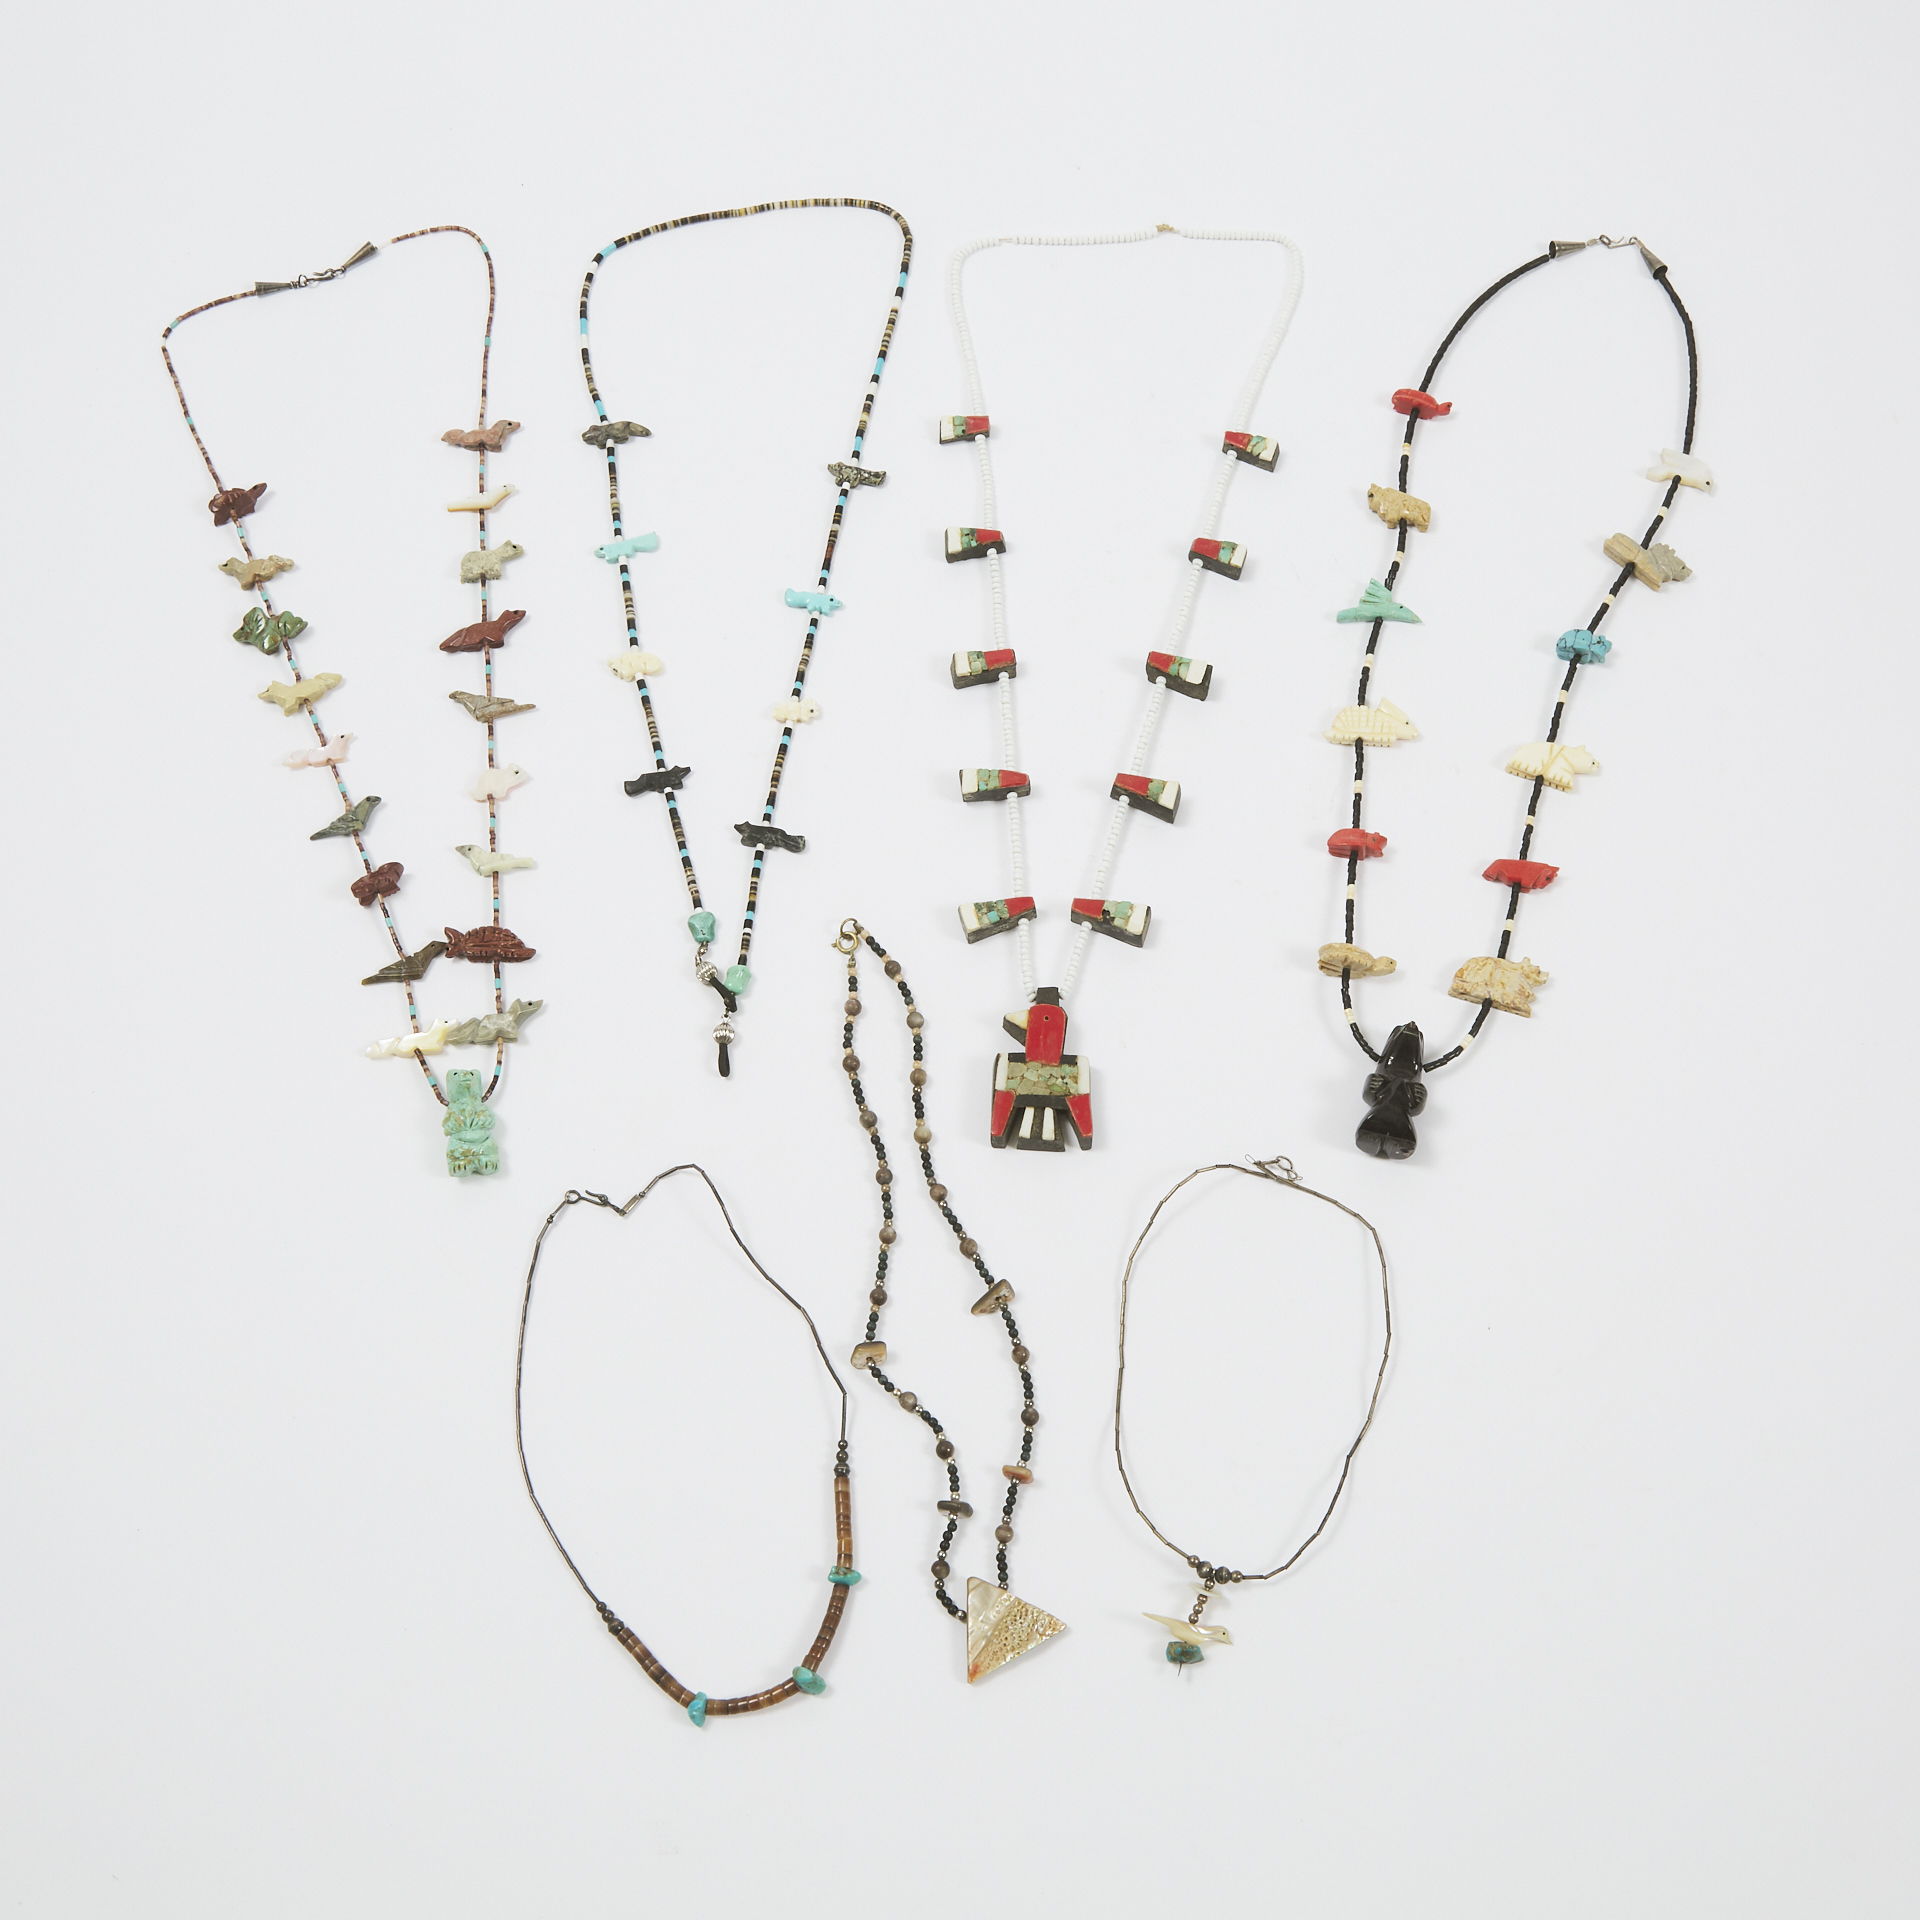 Group of Six Zuni Fetish Necklaces and One Eyeglass String, New Mexico, late 20th century